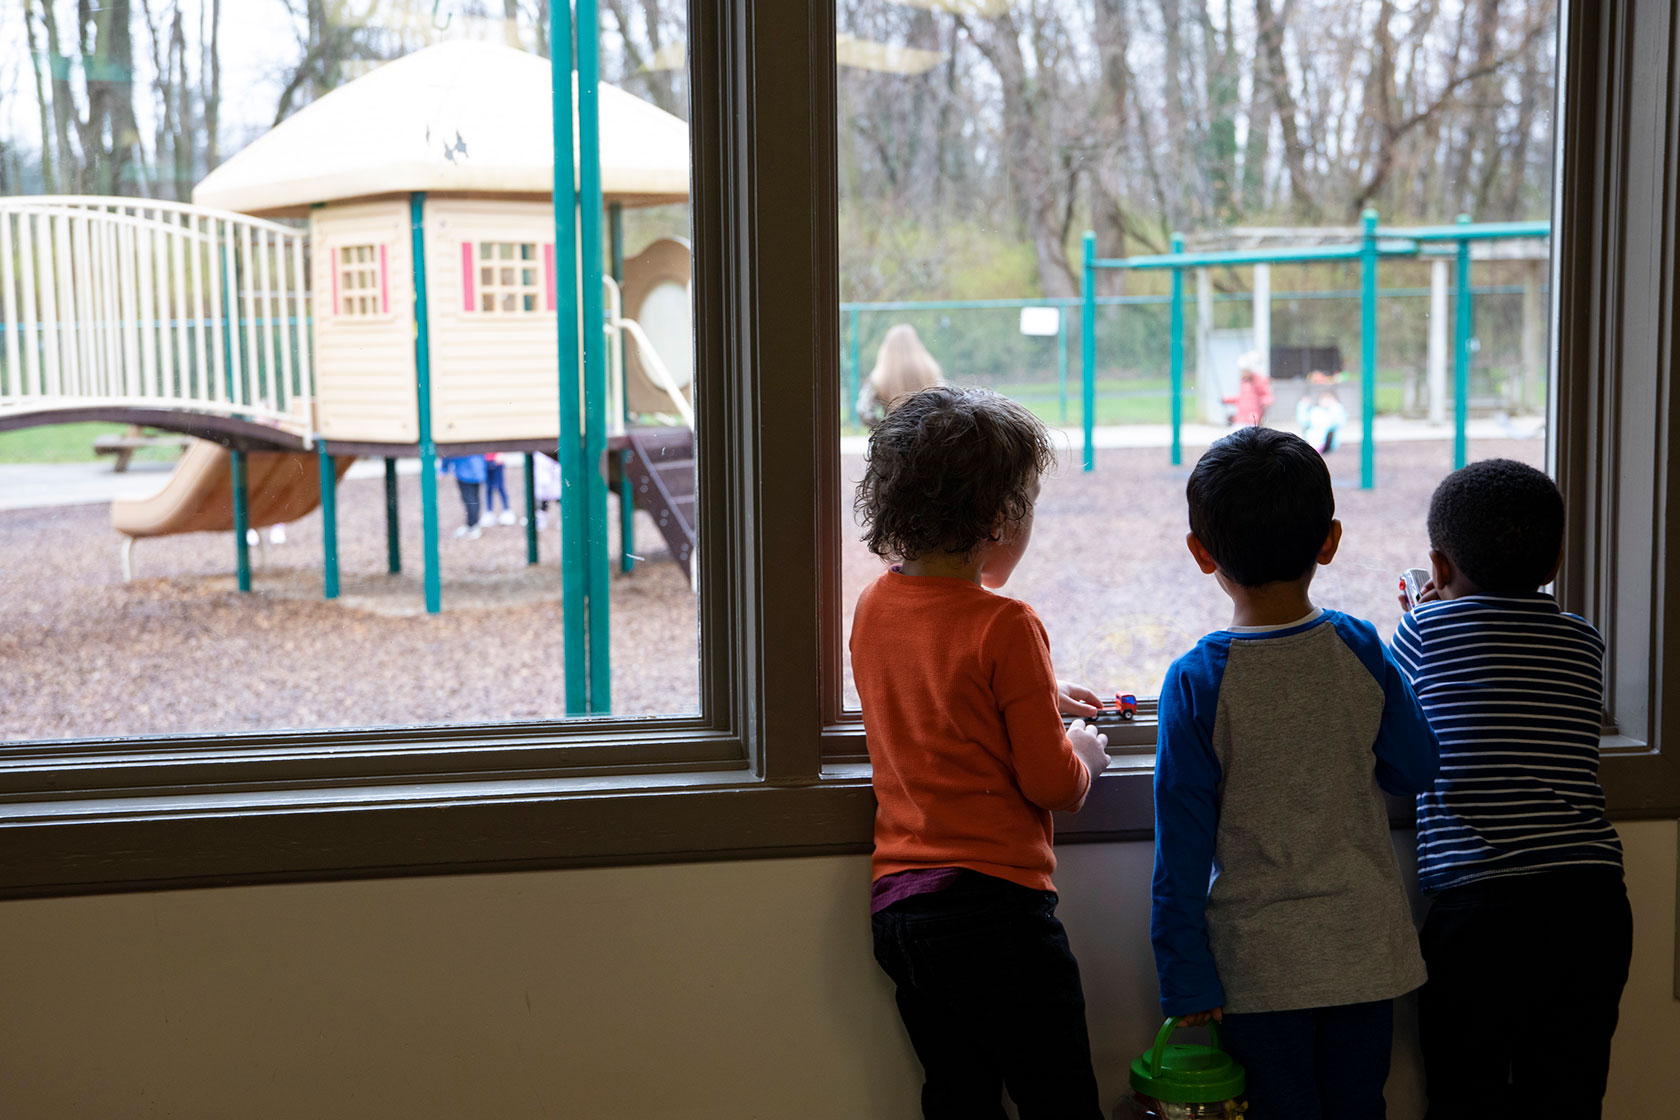 Children participate in activities at a Head Start classroom in Maryland.